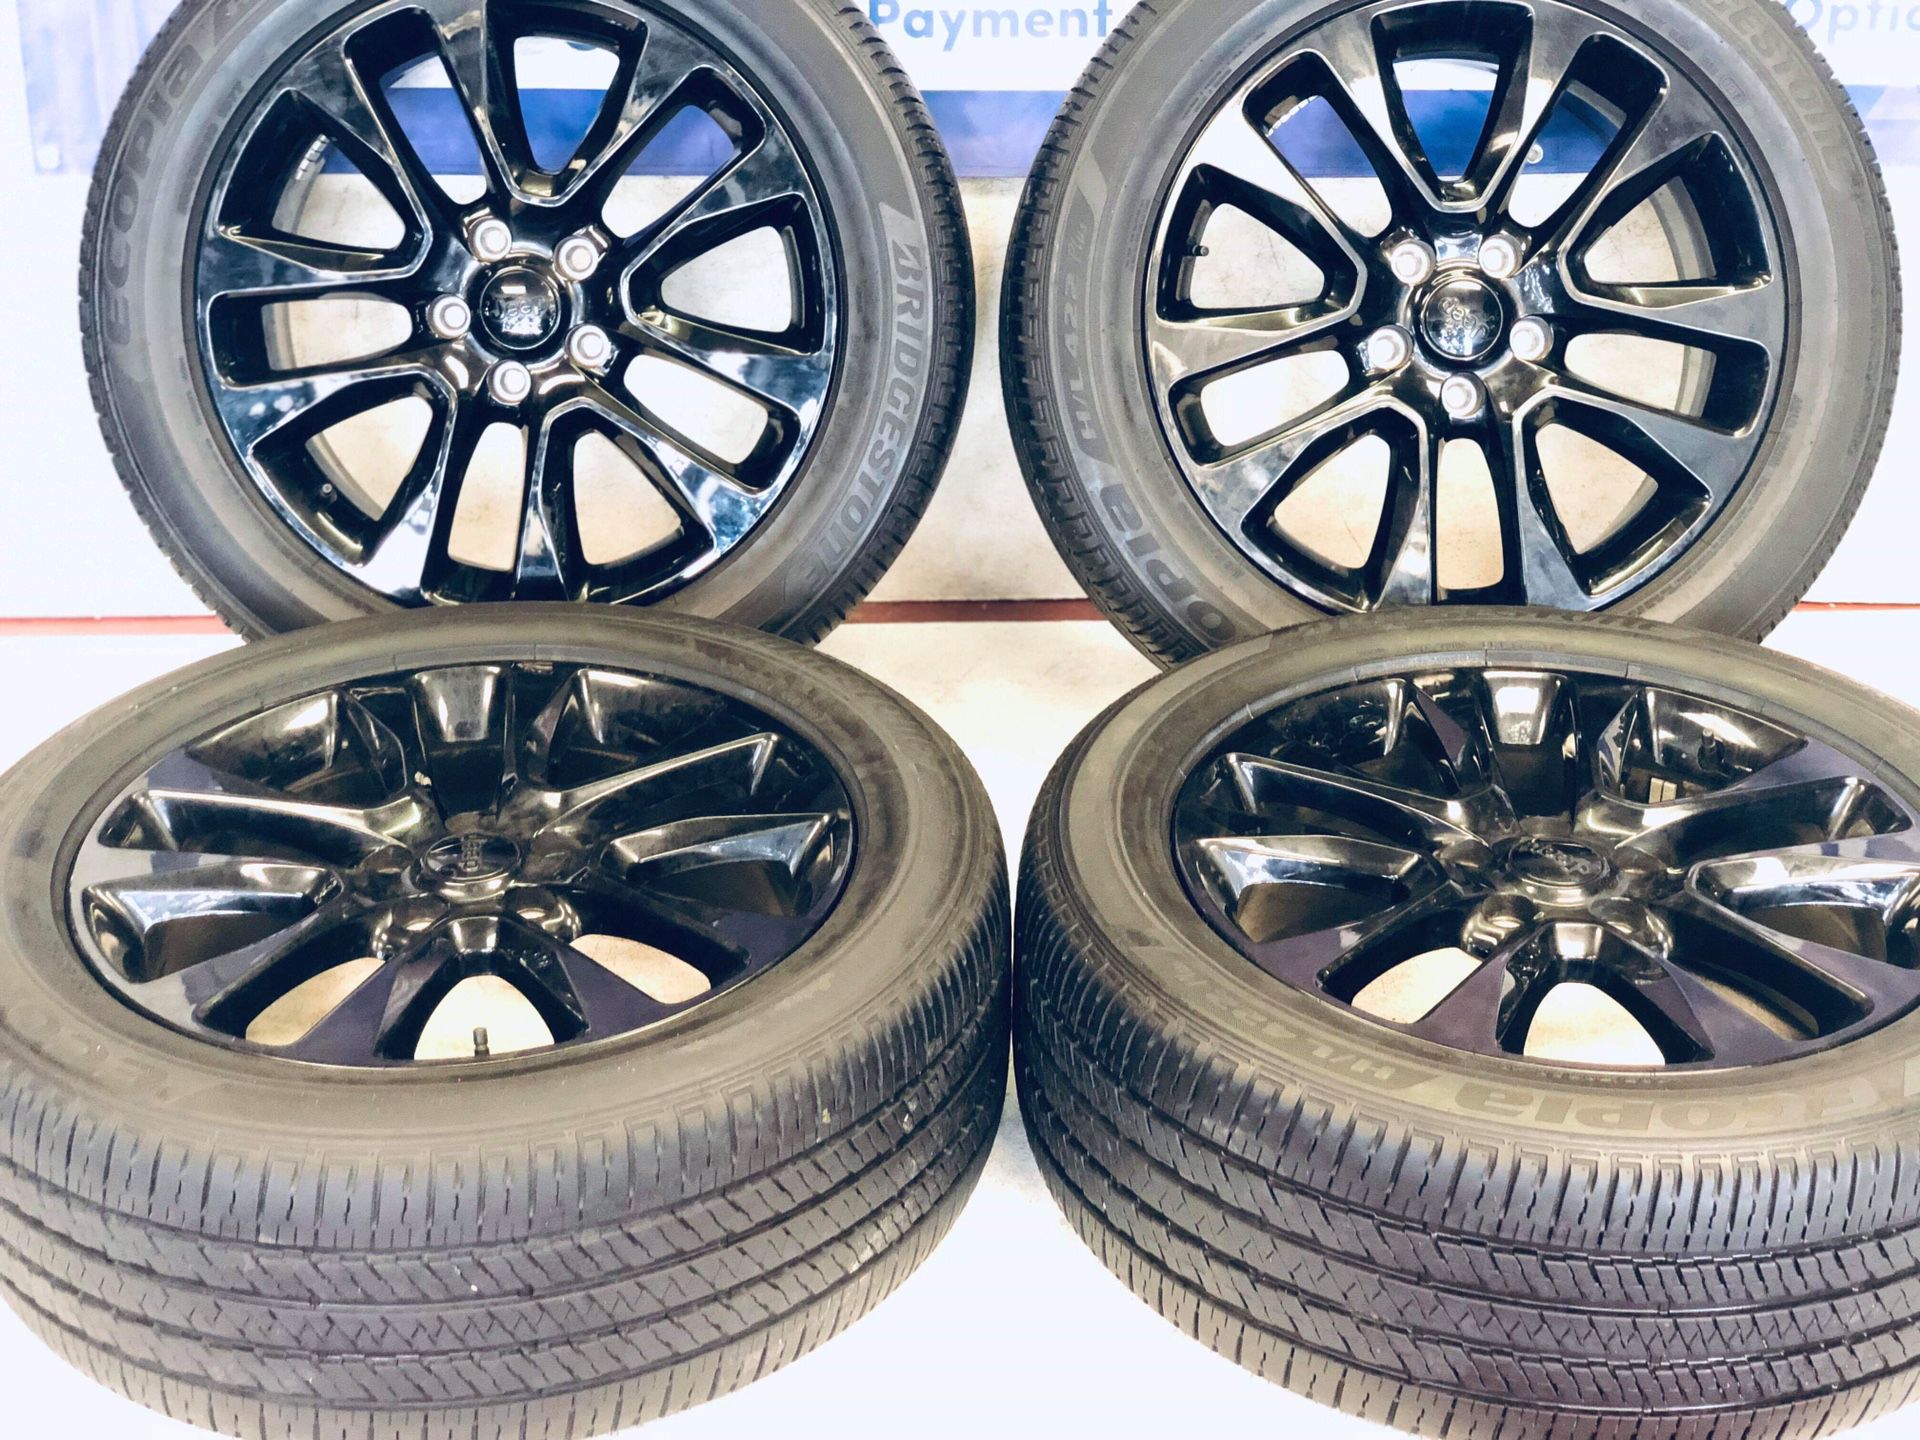 20” Jeep Grand Cherokee 9168 Hollander. wheels and tires package deal 1199.00 only 𝐖𝐄𝐑𝐄 𝐋𝐎𝐂𝐀𝐓𝐄𝐃 𝐀𝐓: 📍 32760 𝐕𝐀𝐍 𝐃YKE AVE WAREEN , 𝐌𝐈 𝟒𝟖𝟎93 ☎ (𝟓